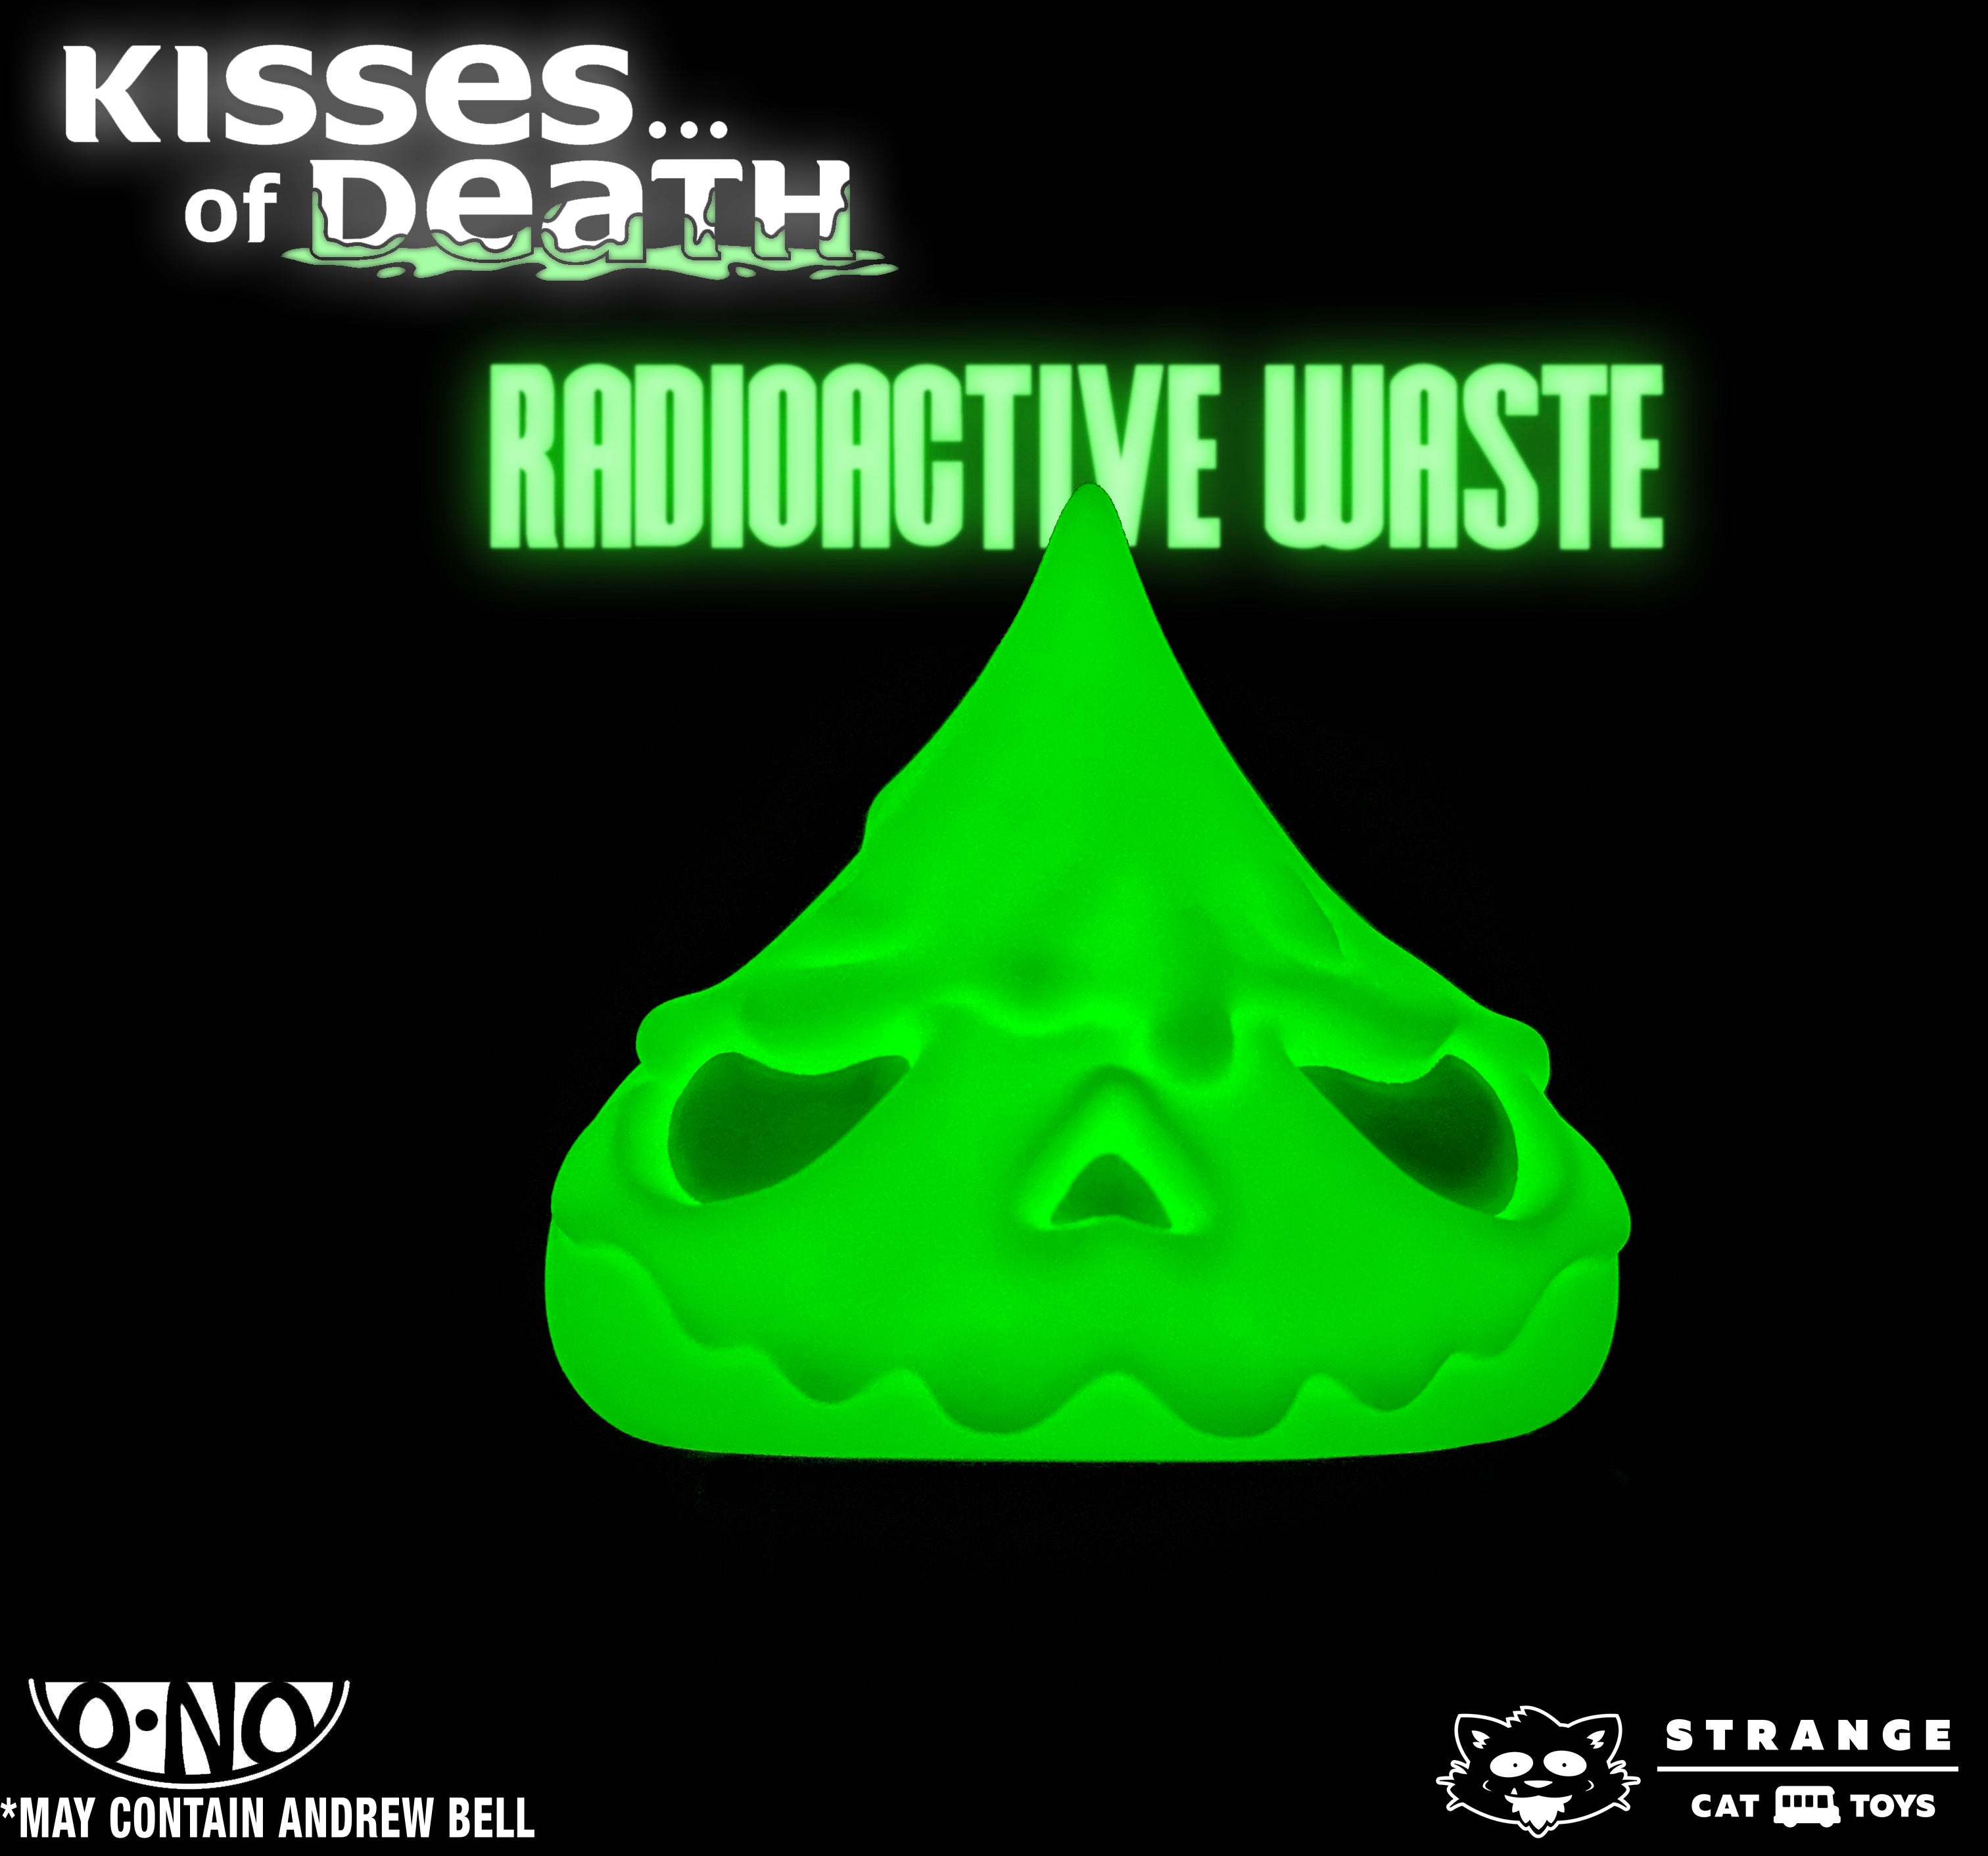 Skull Kisses of Death 4" : Mostly Evil - Radioactive Waste Exclusive by Andrew Bell